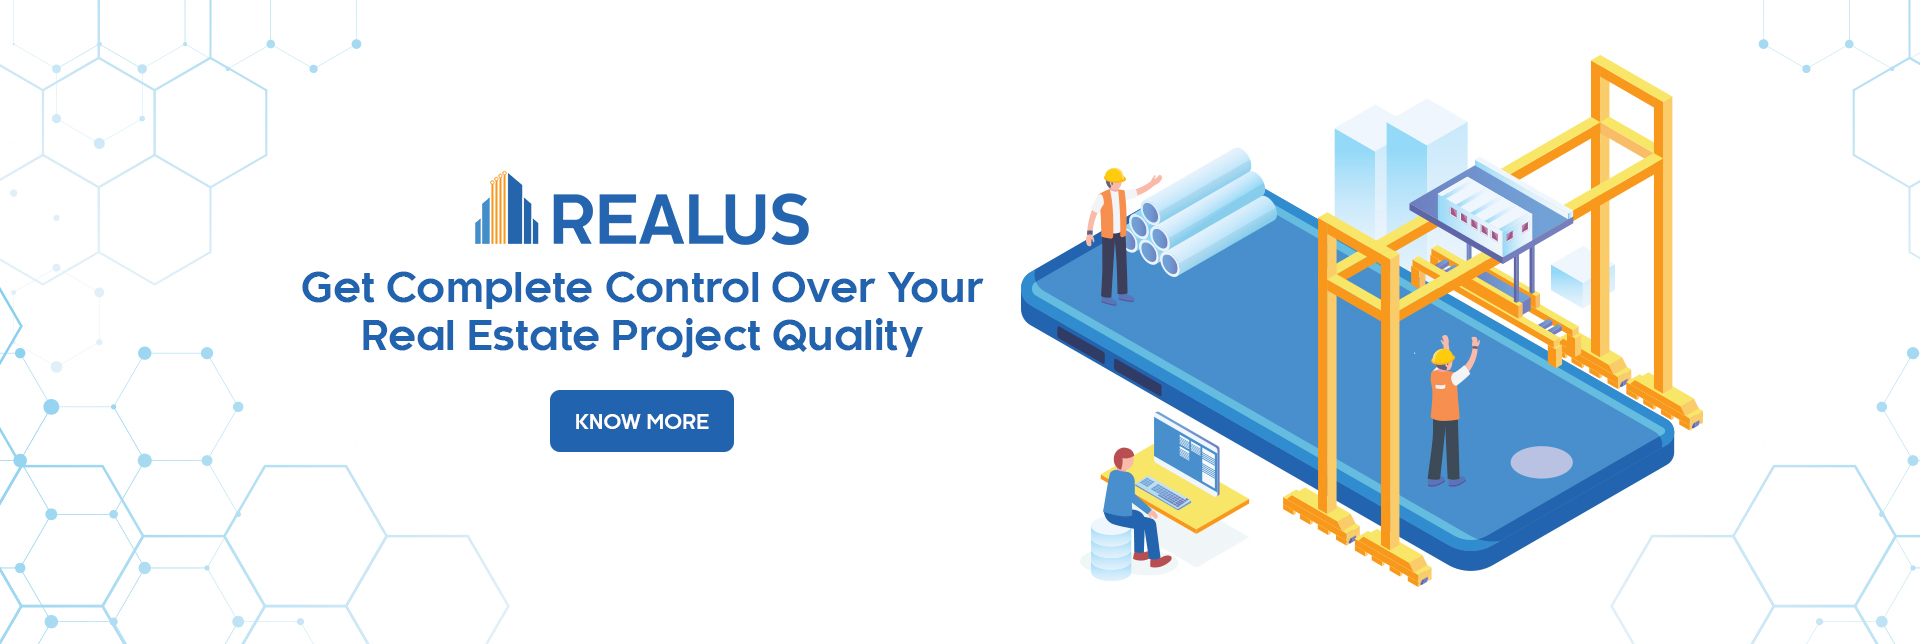 construction project management software- Realus